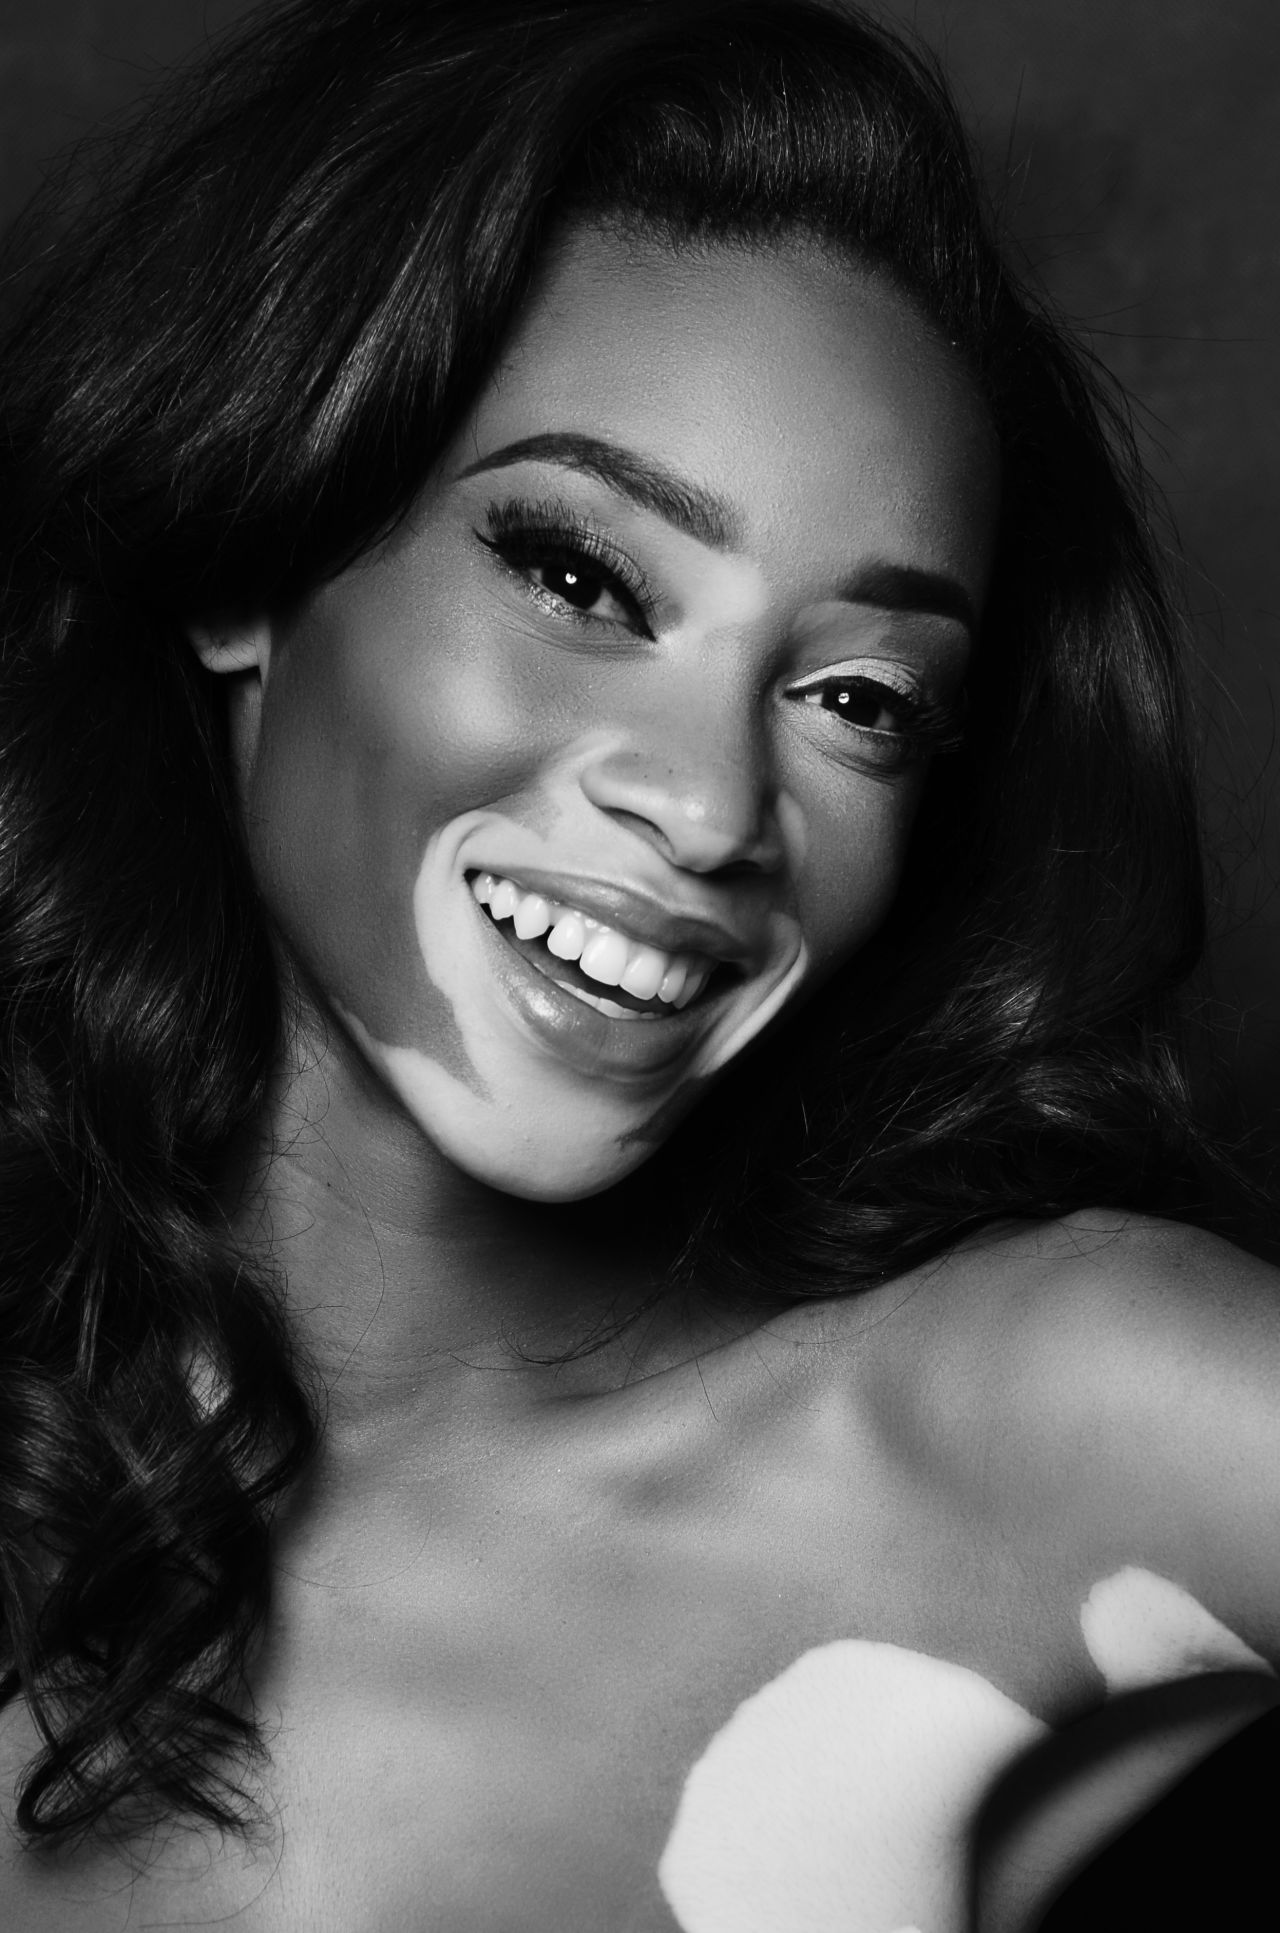 Chantelle Brown-Young became a finalist on season 21 of "America's Next Top Model" in 2014. She didn't win but became a fan favorite, voted back into the contest by viewers after exiting earlier in the season. 